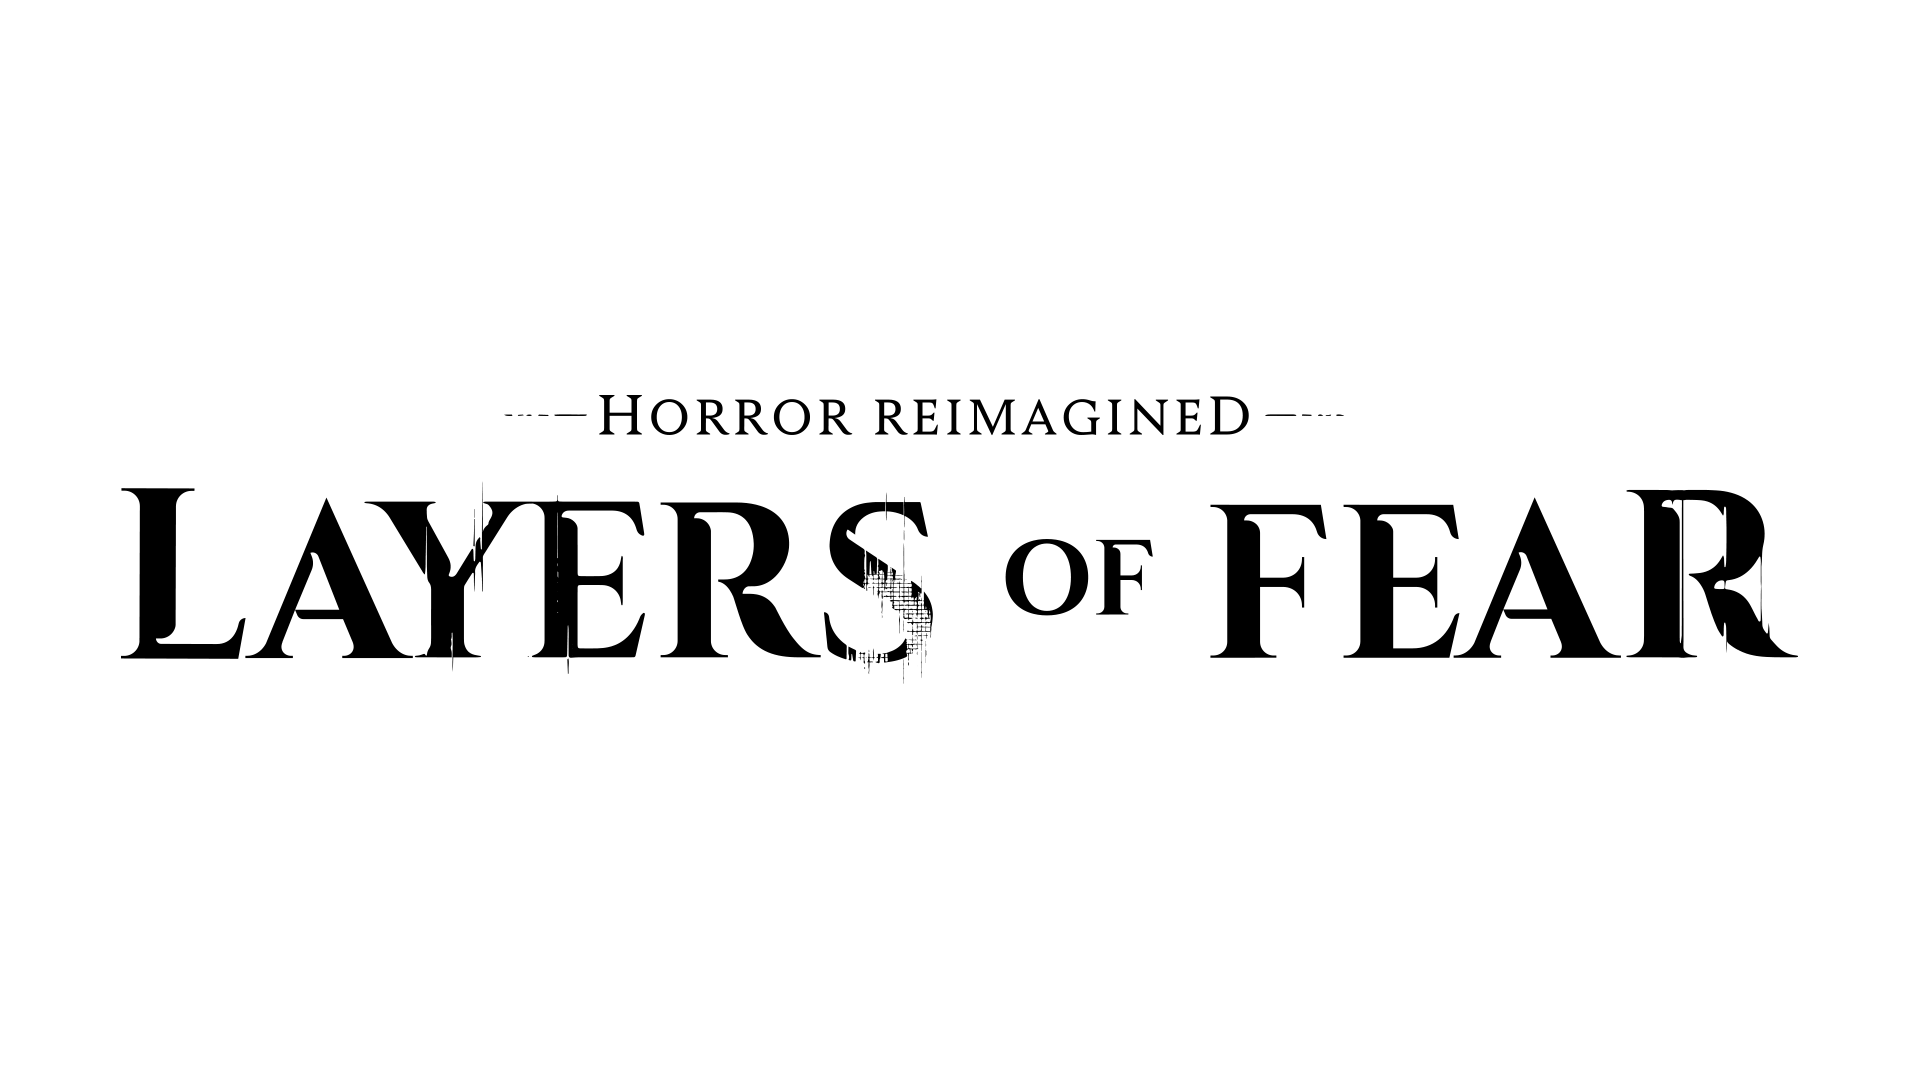 Check Out 11 Minutes Of Layers Of Fear Gameplay In New Trailer - Game  Informer